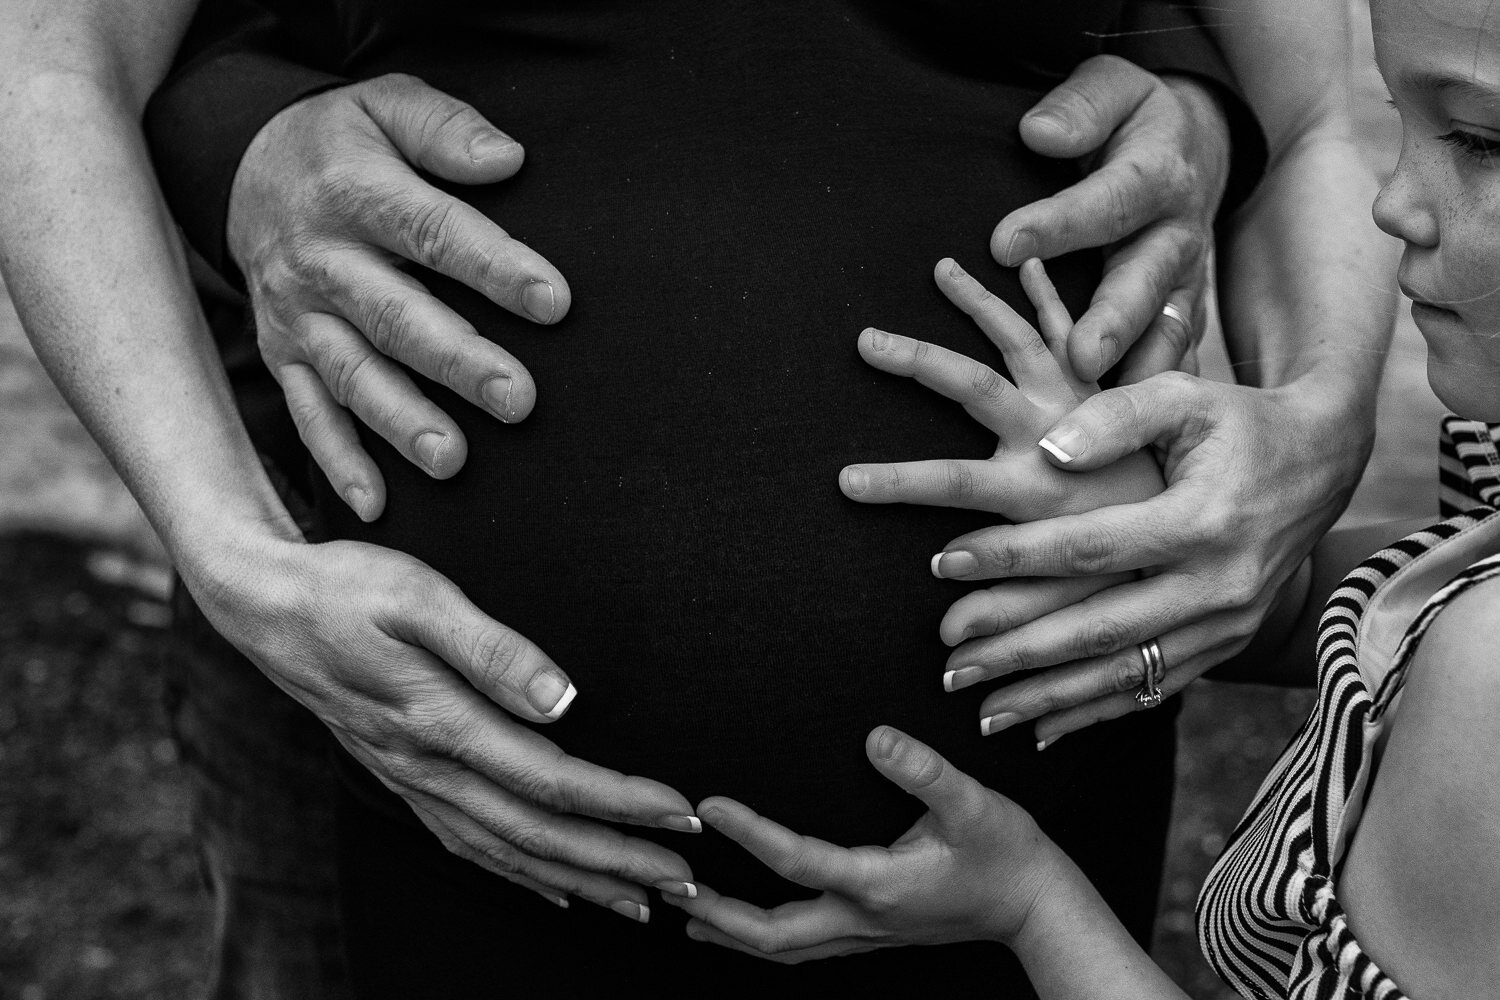 Detail shot of hands on pregnant belly